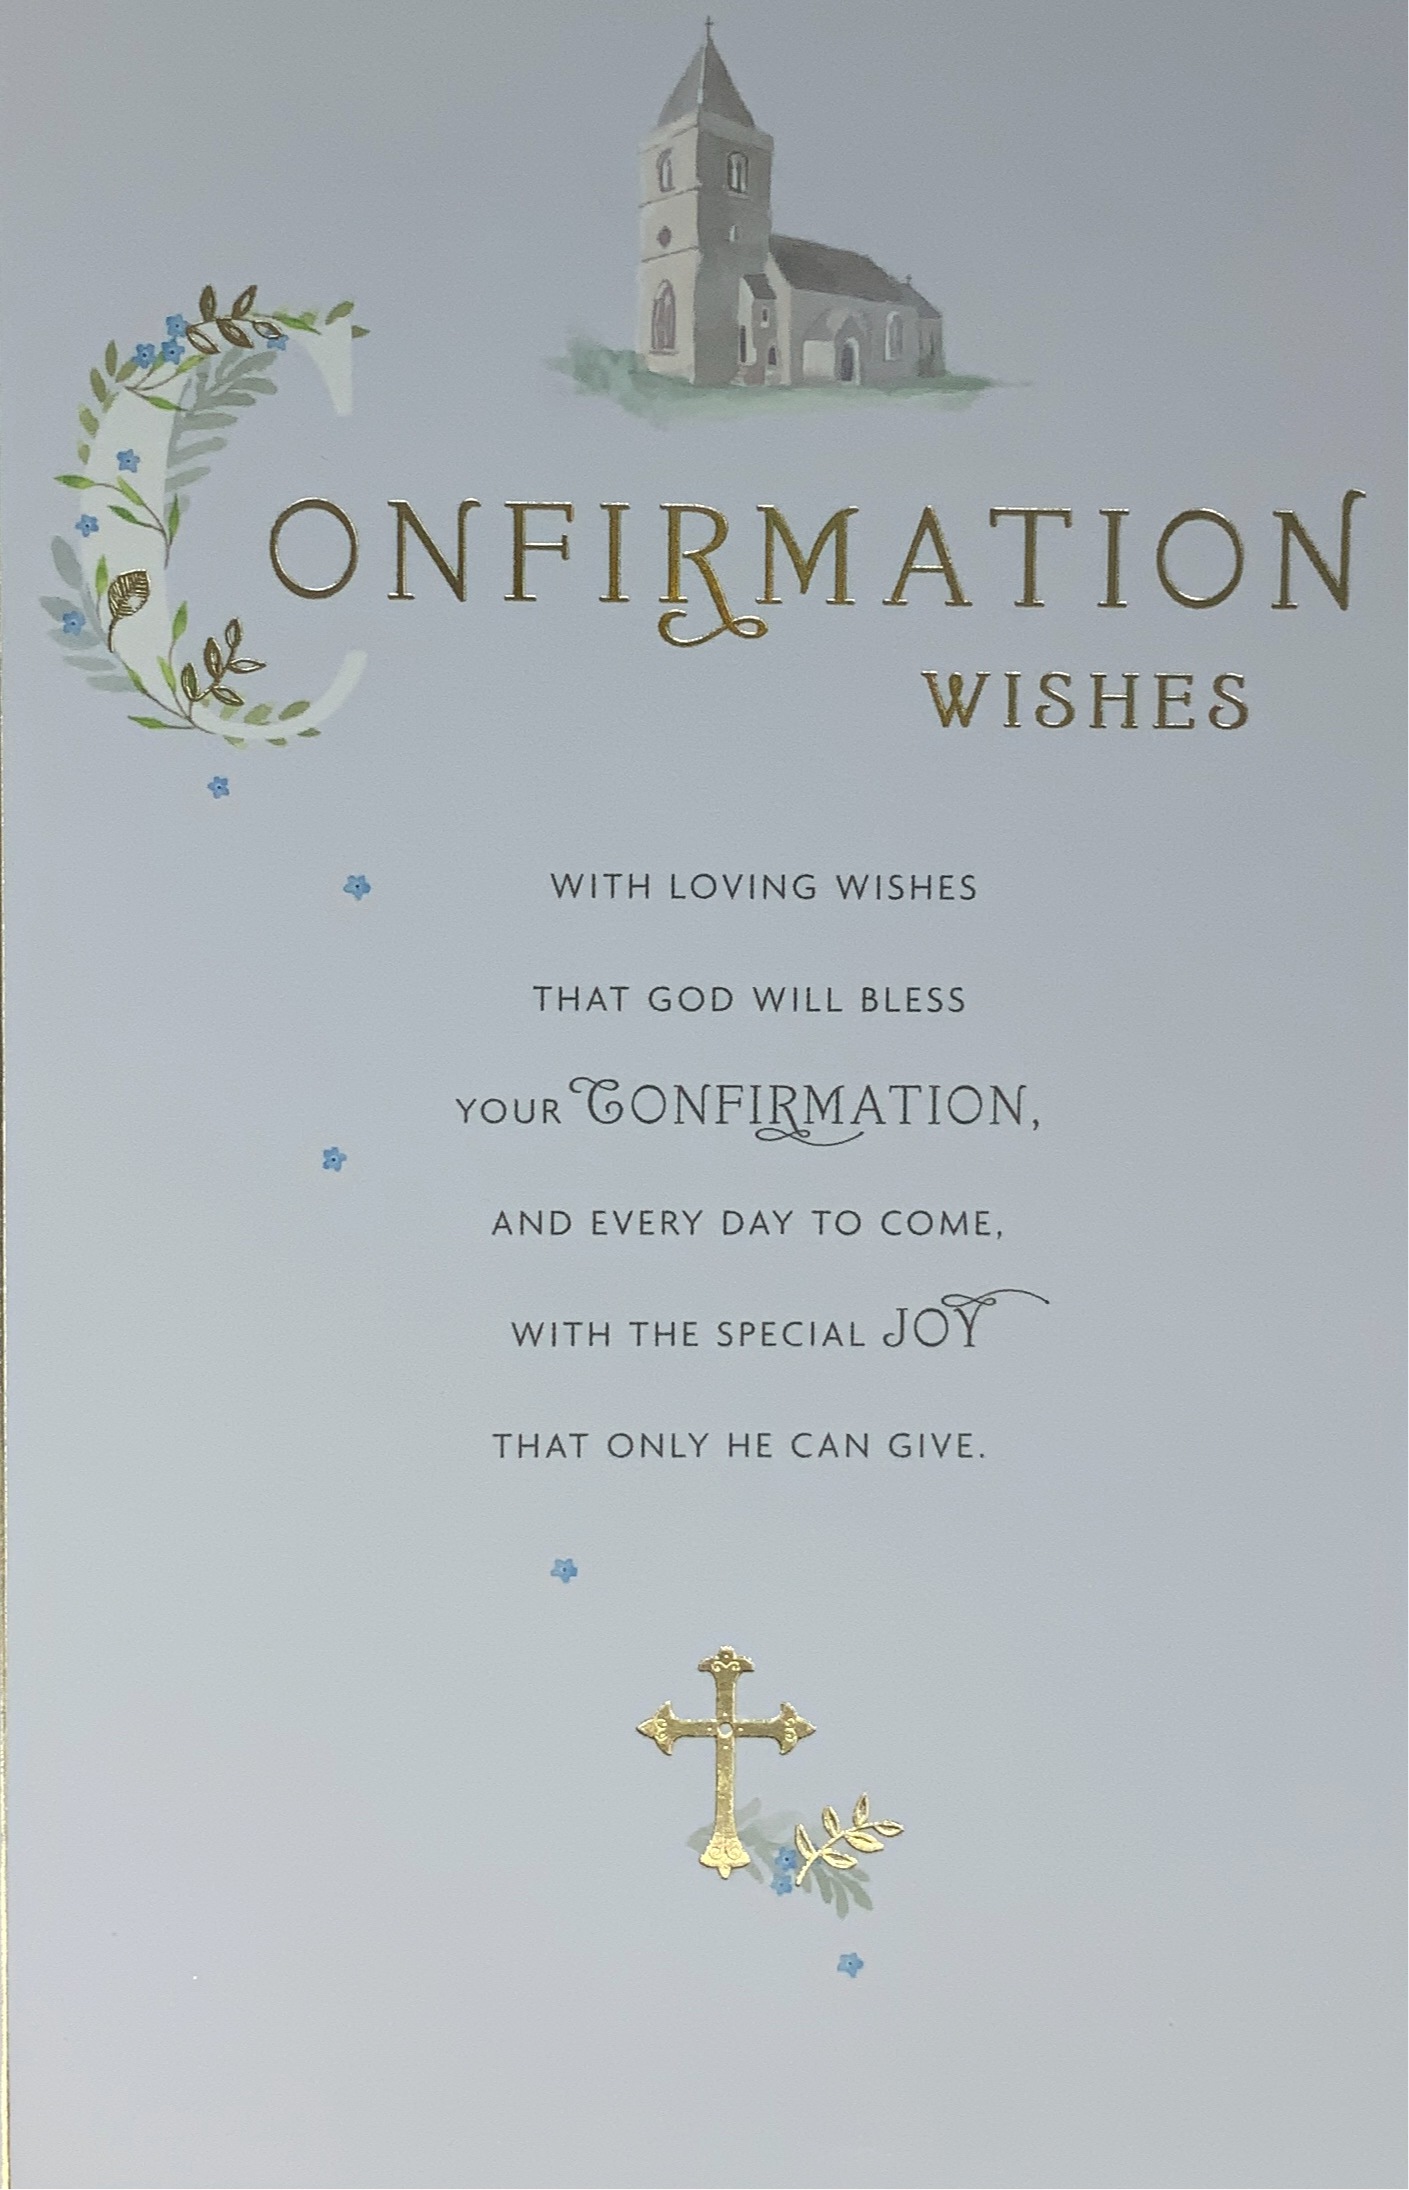 Confirmation Card - With Loving Wishes